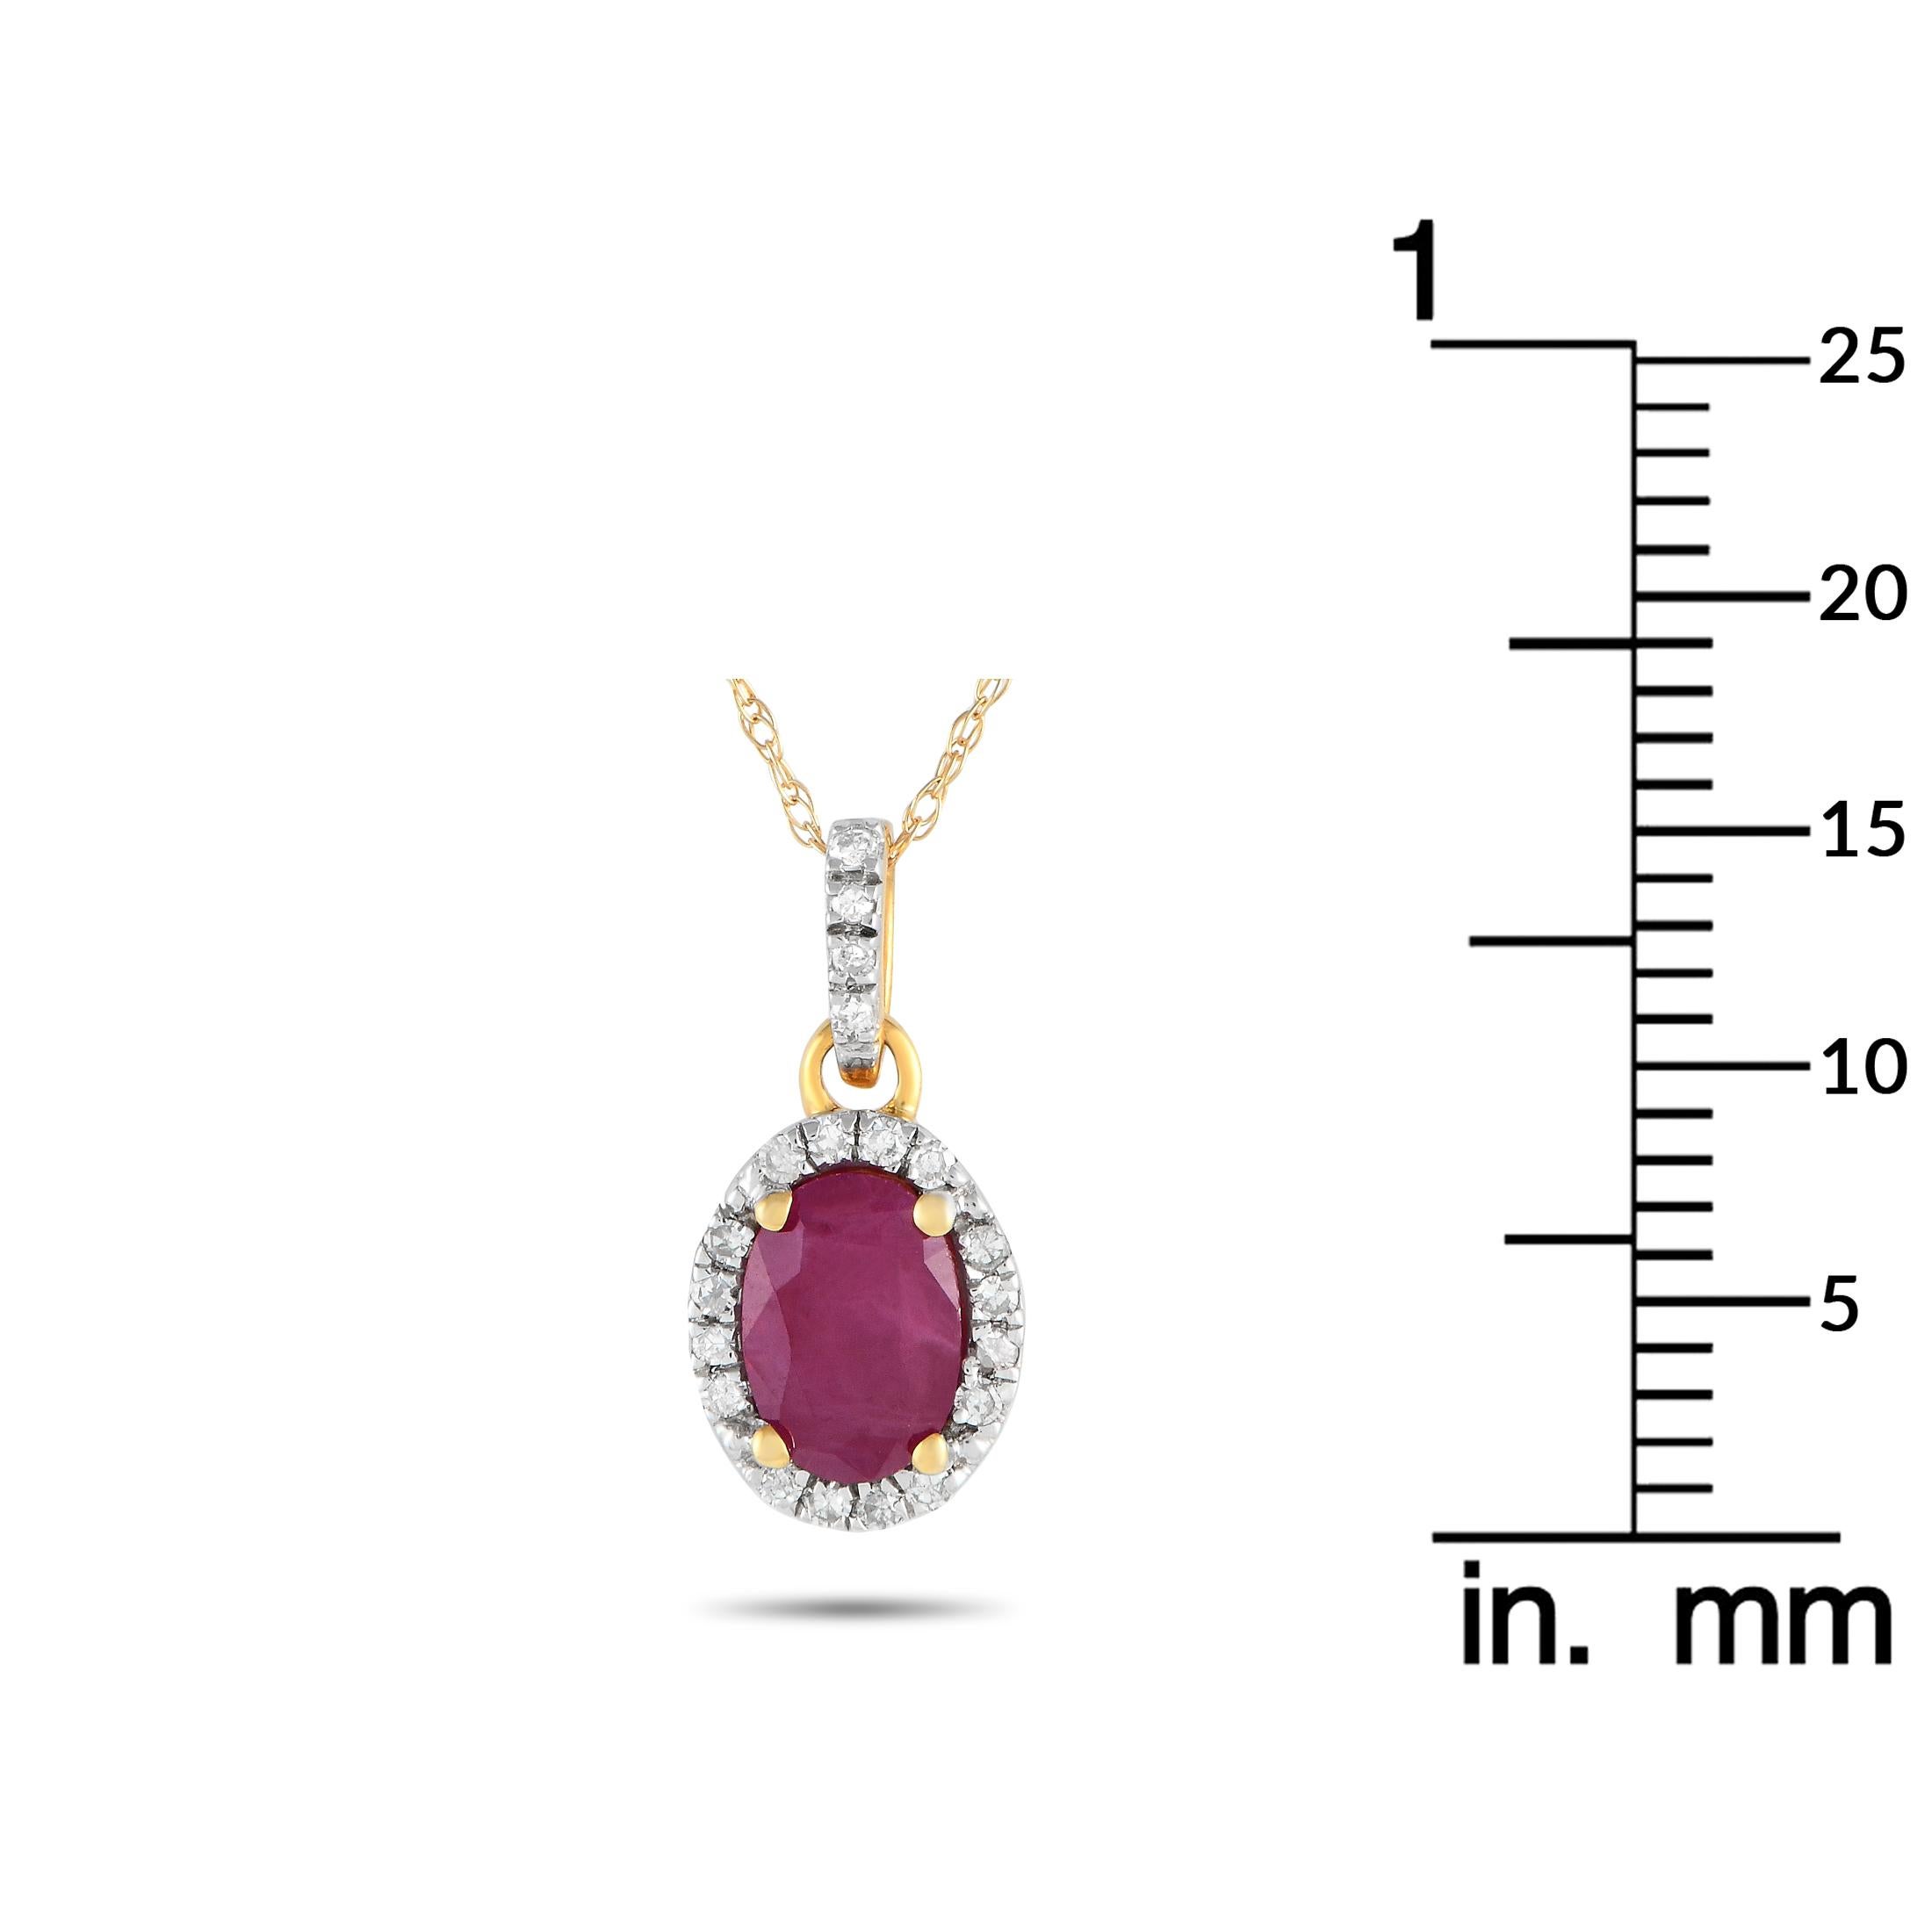 LB Exclusive 14K Yellow Gold 0.10ct Diamond & Ruby Pendant Necklace PD4-16075YRU In New Condition For Sale In Southampton, PA